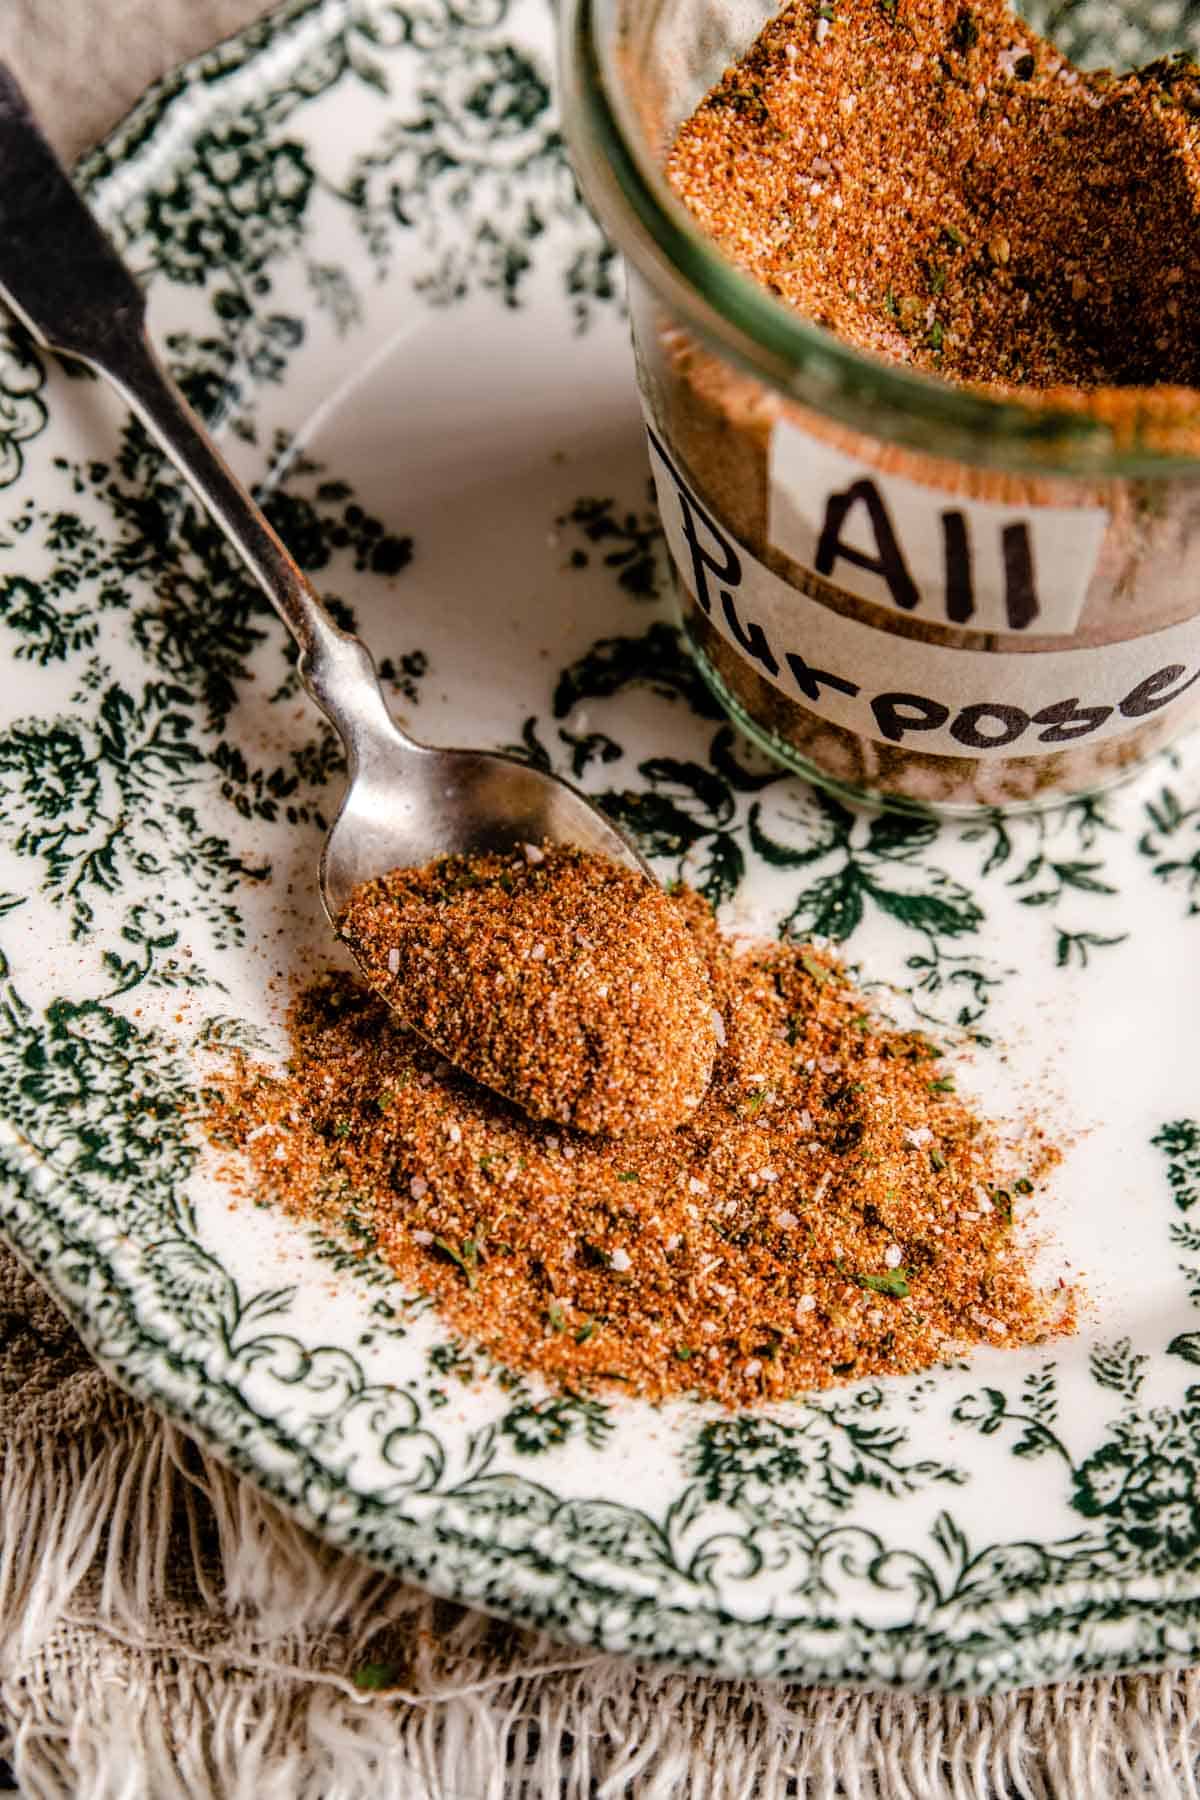 a spoon showing the contents of a homemade all purpose seasoning blend.